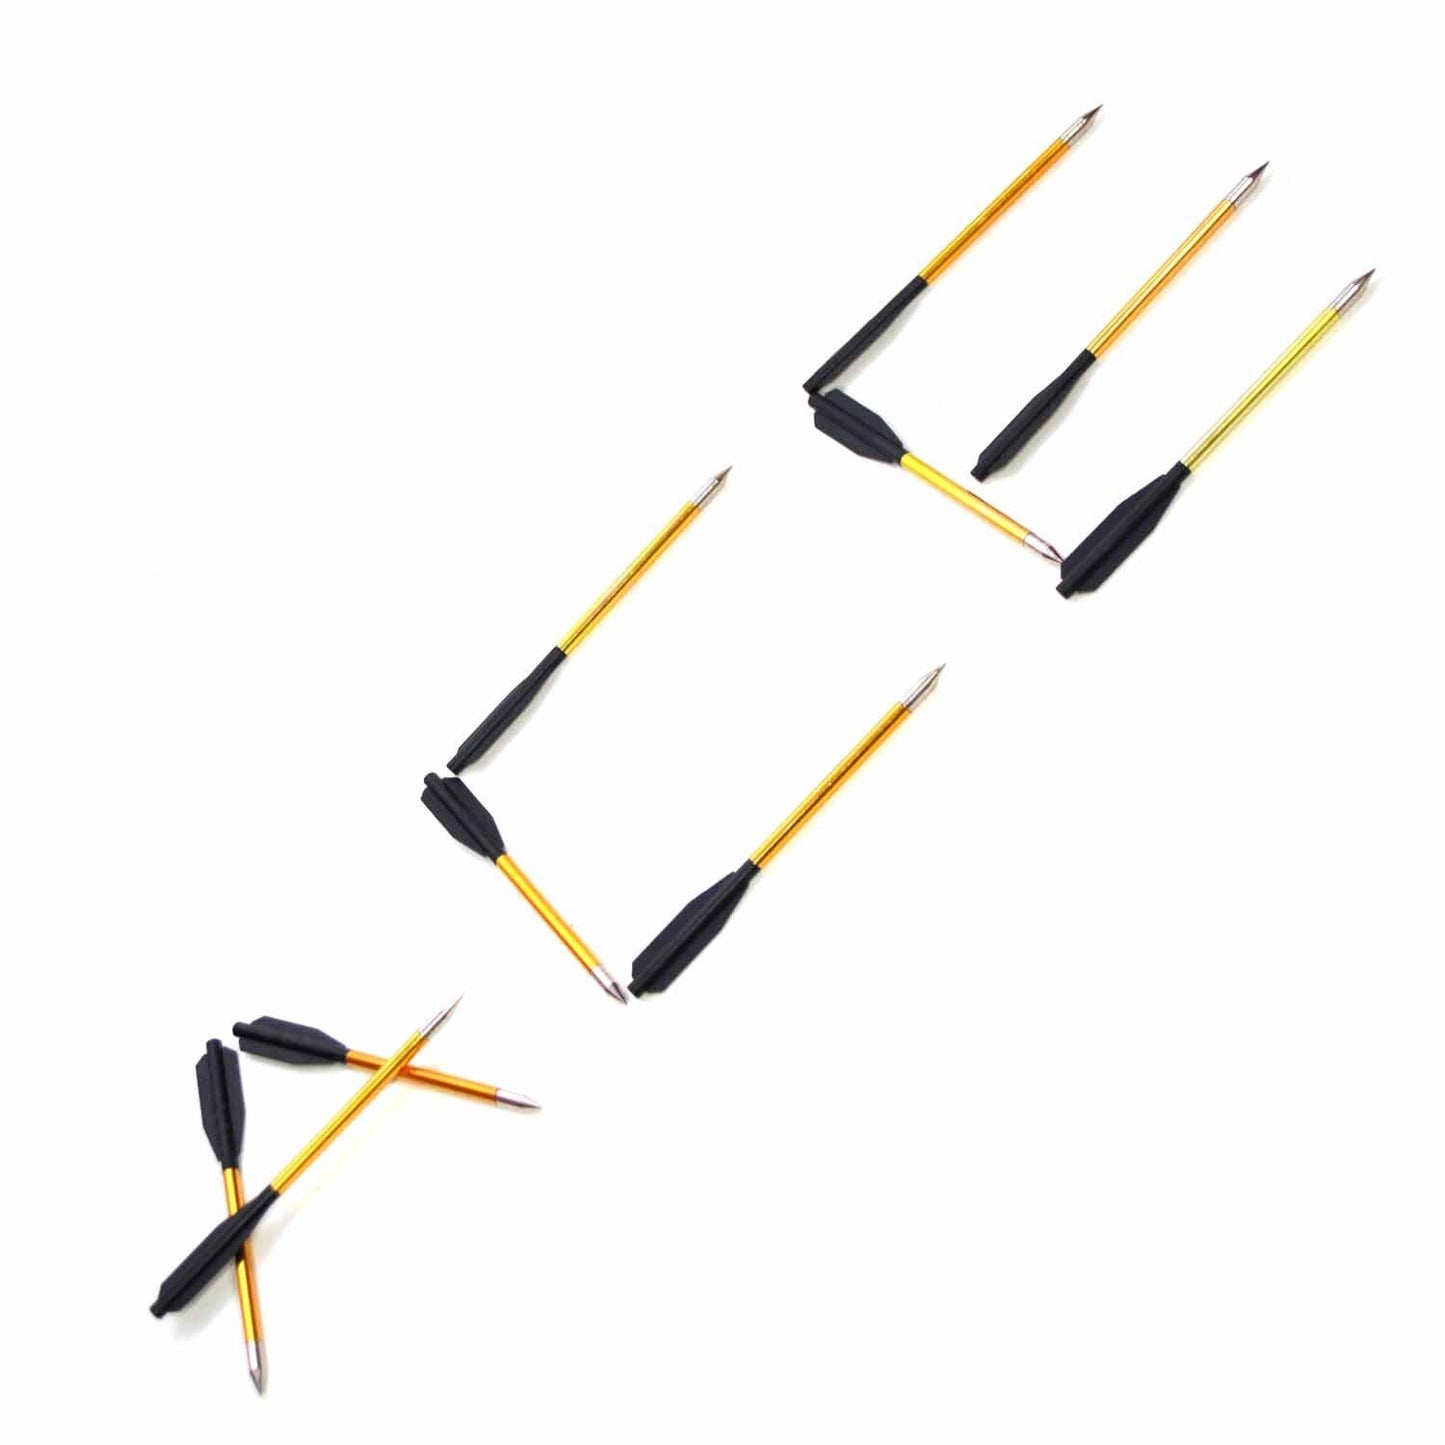 Ace Martial Arts Supply Crossbow Arrows with High Impact Bolts 50-Pounds and 80-Pounds (12 Pieces)